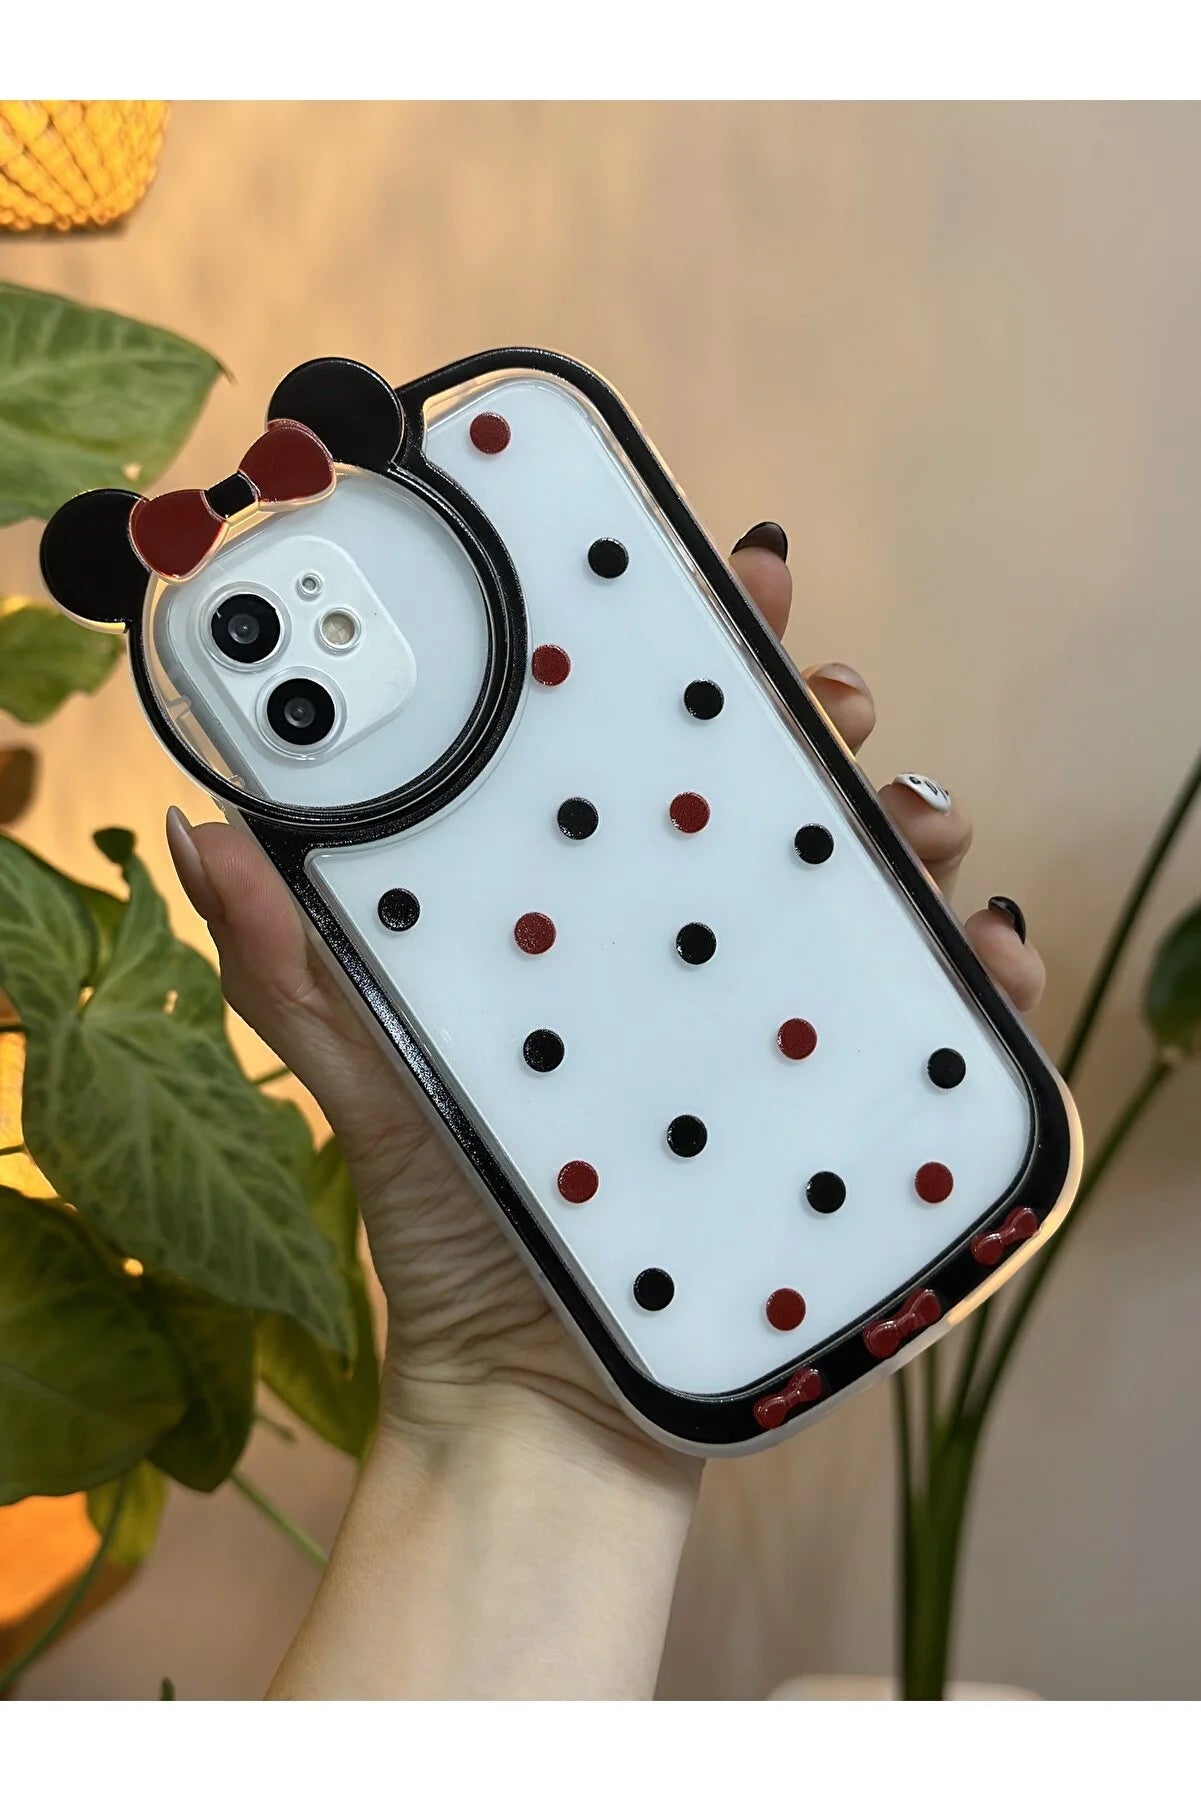 Special Design Thick Silicone Protective Case for iPhone 11 - Mickey Mouse 3D Cartoon Character with Black Ears, Compatible with 3rd and 4th Generations